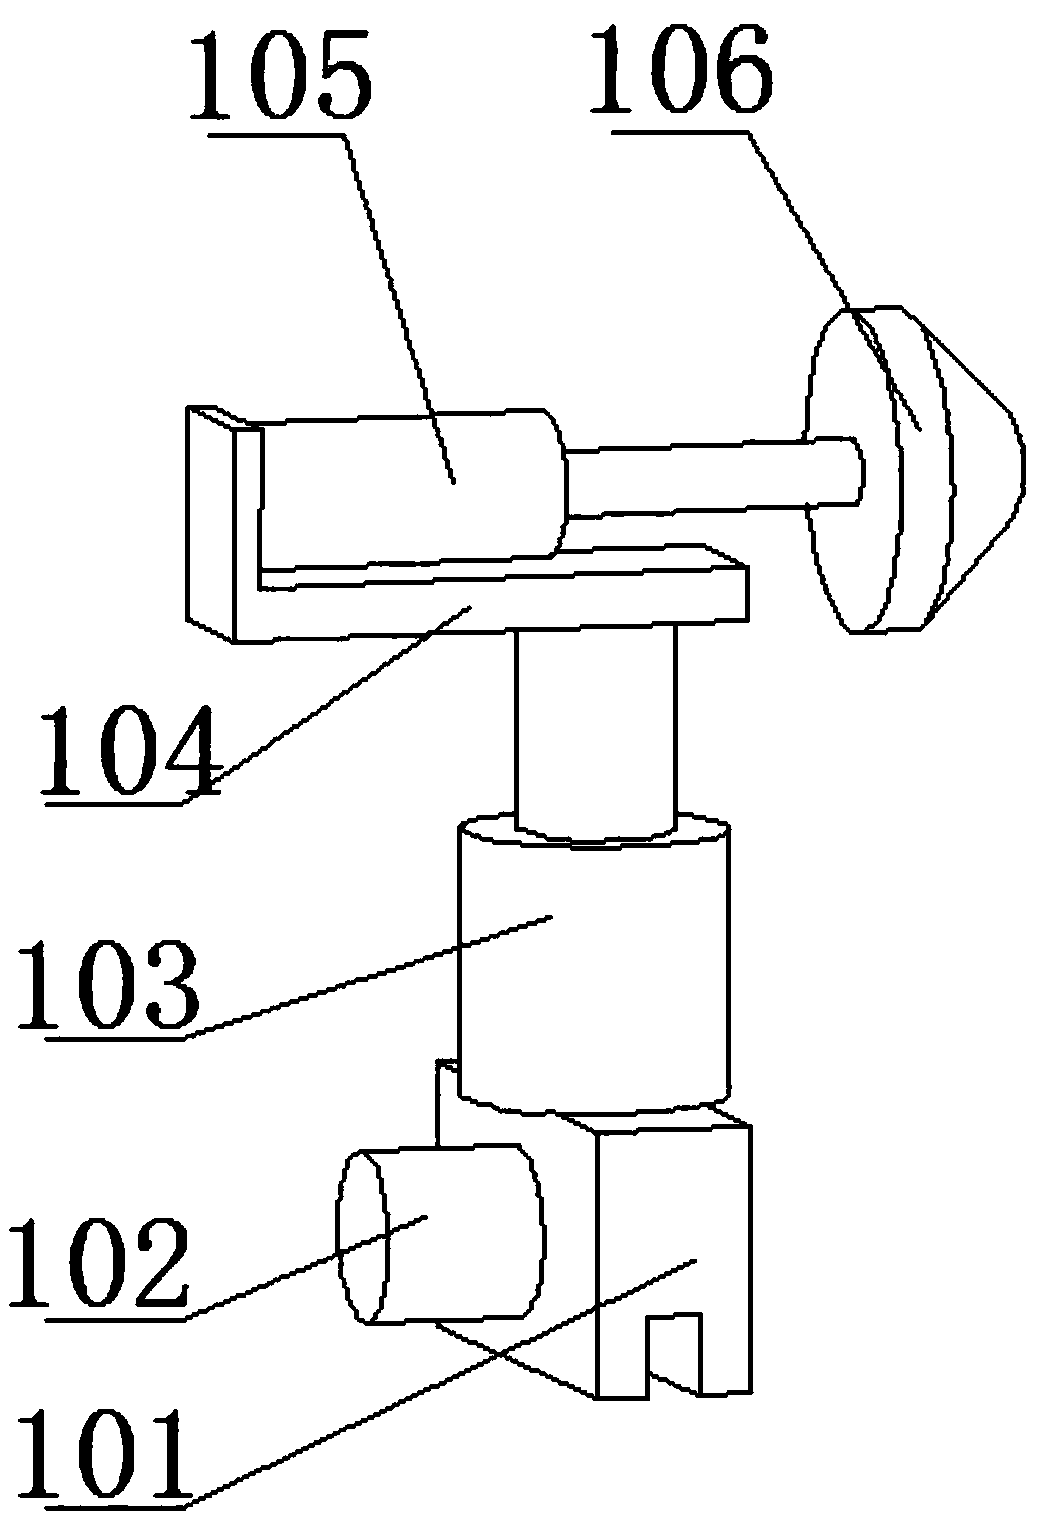 A hexagonal binding device for steel pipes